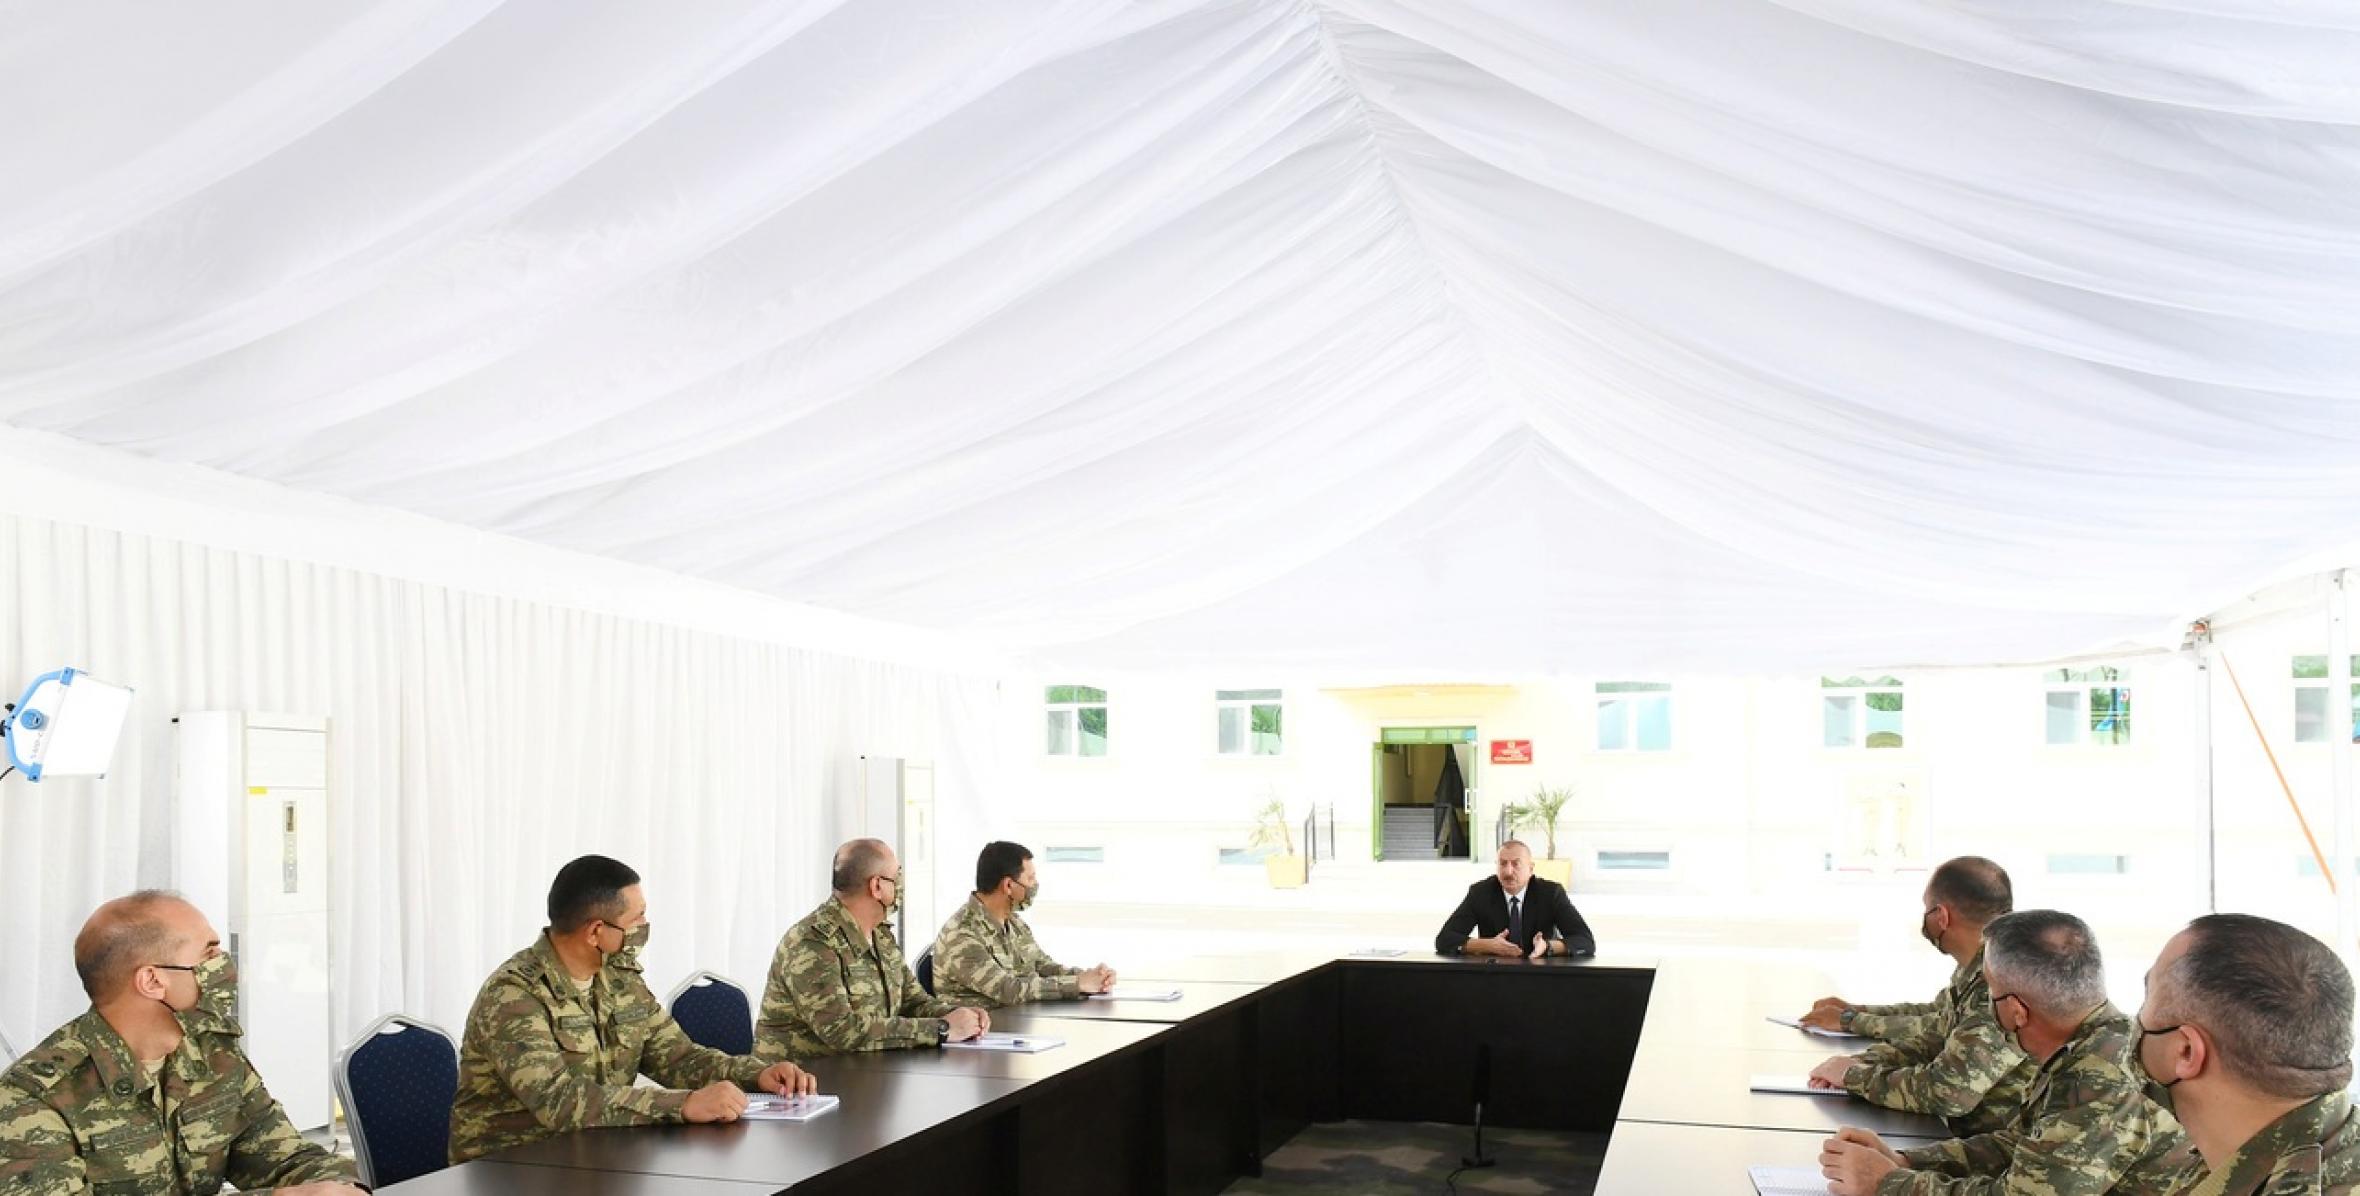 Speech by Ilham Aliyev at the opening of Defense Ministry’s military unit